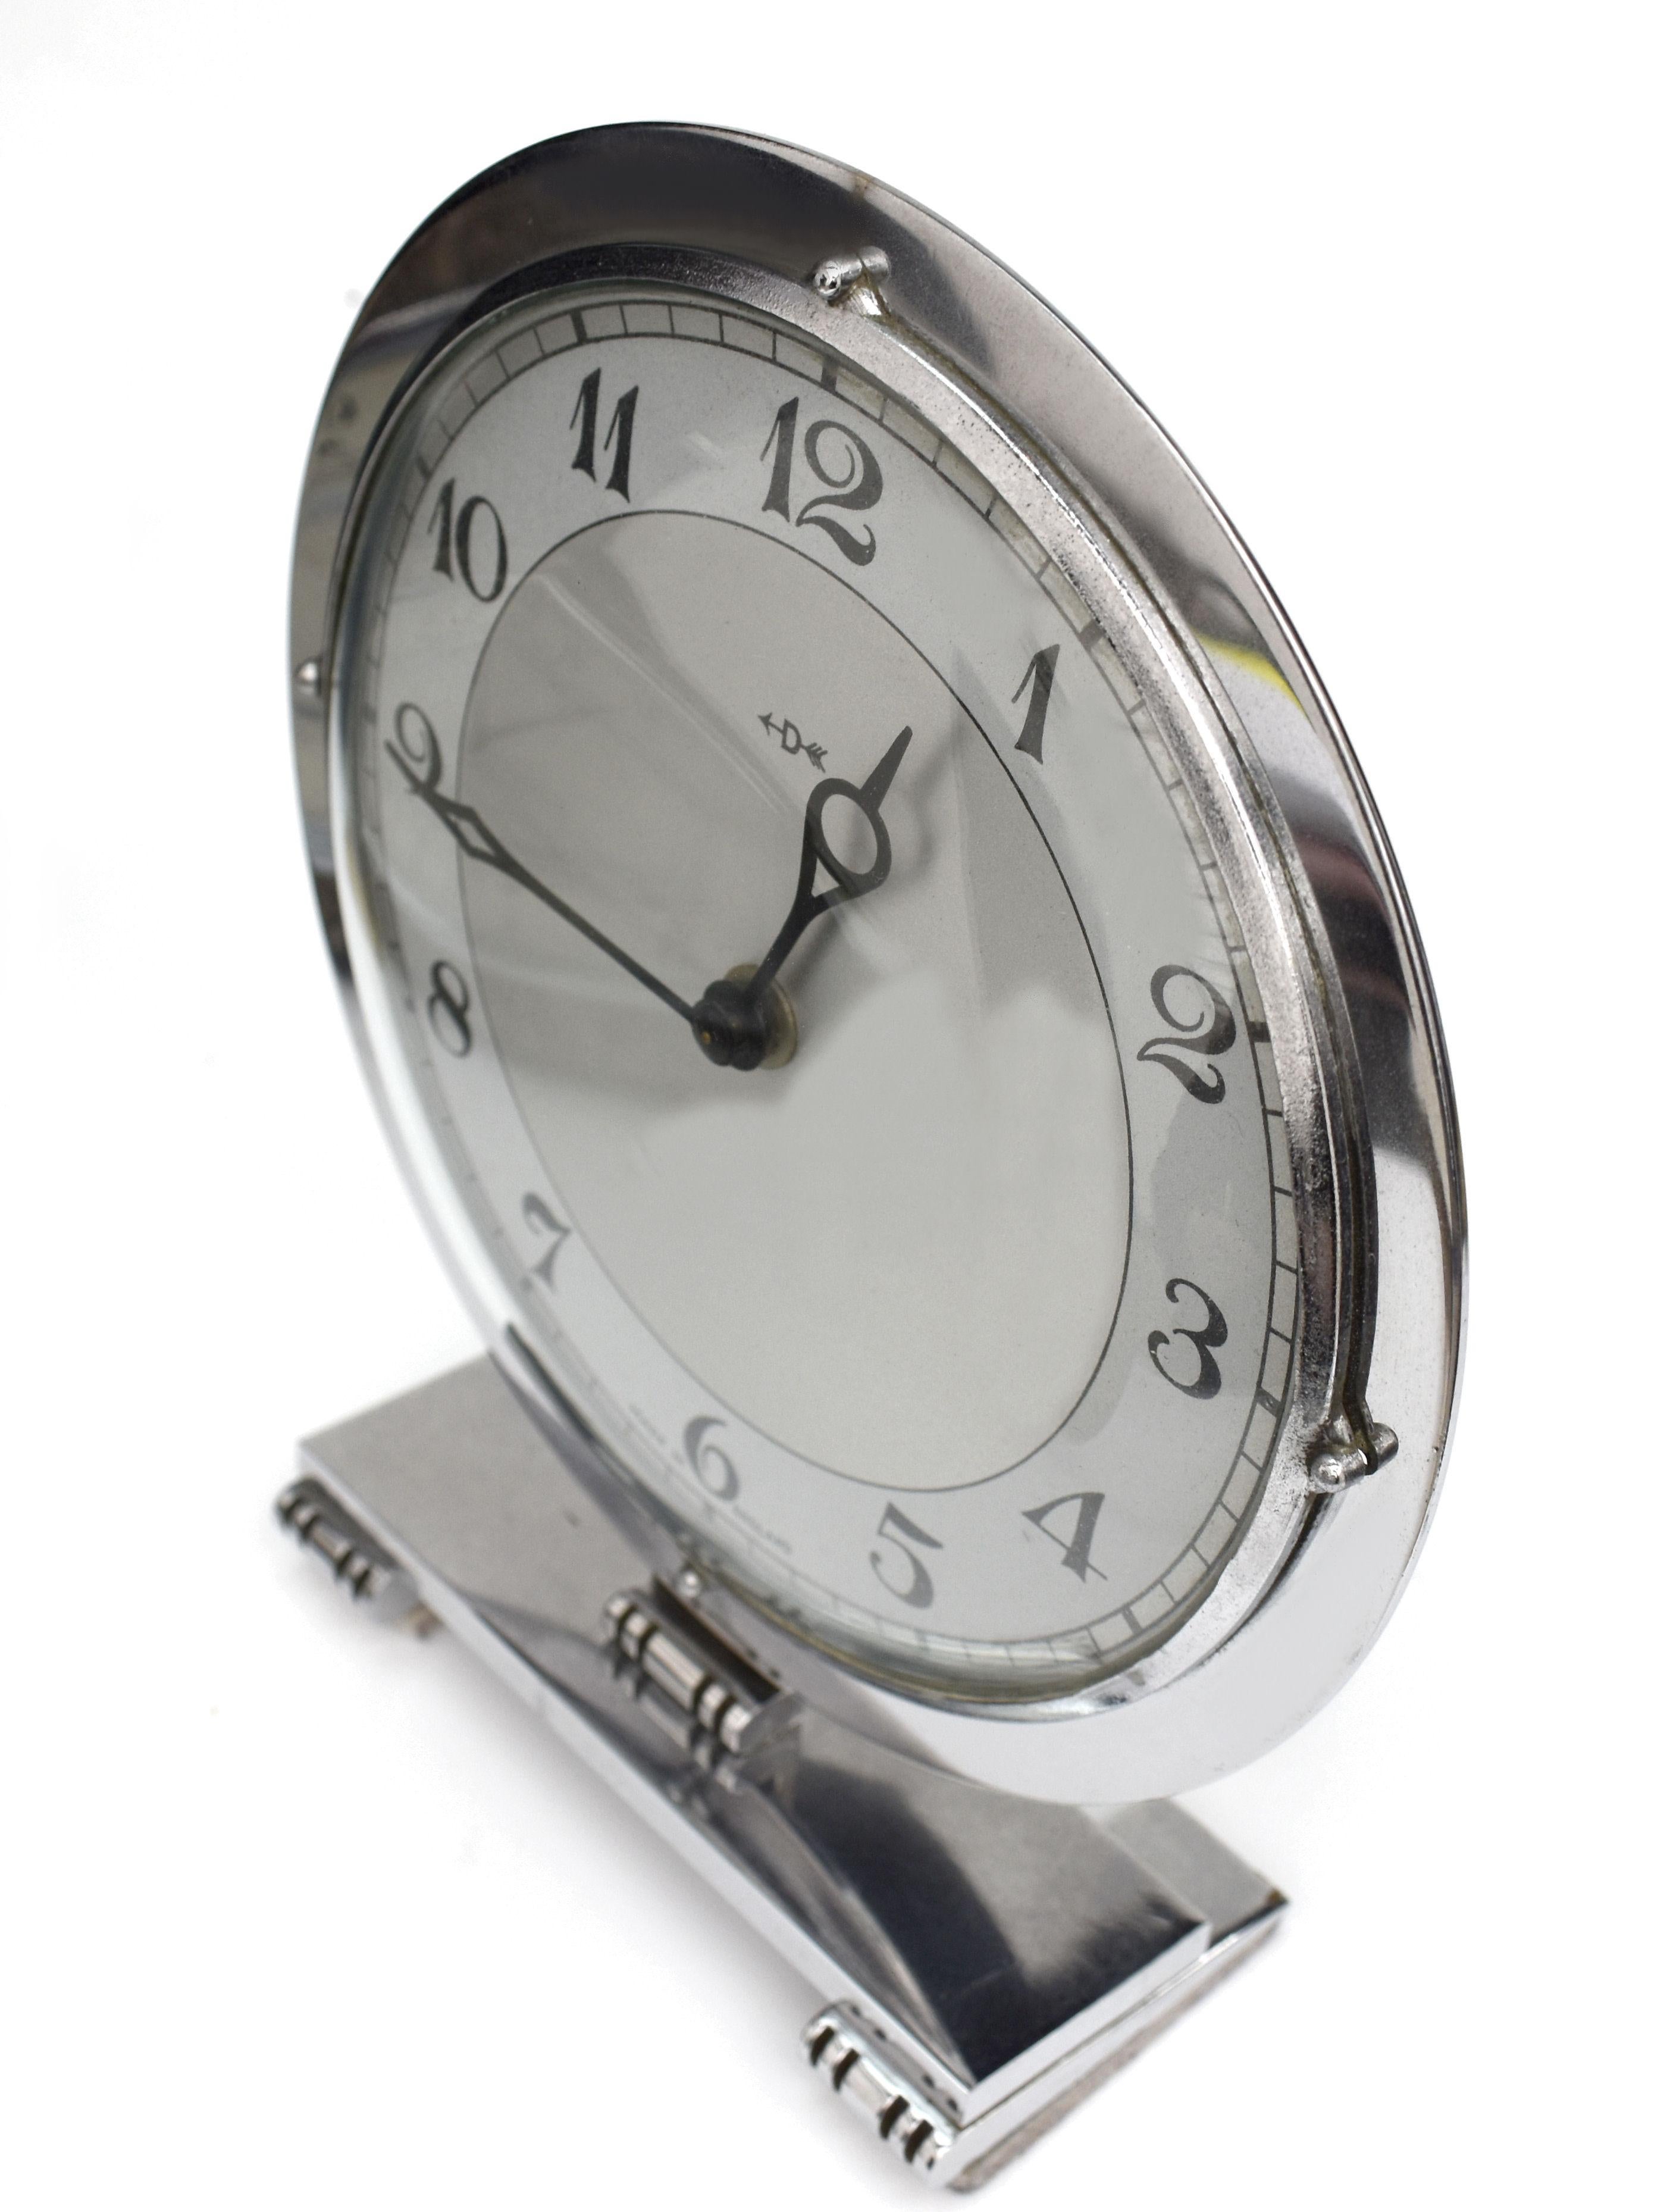 Art Deco English Chrome Clock , 8 Day, Mechanical, by Smiths, circa 1930 In Good Condition For Sale In Devon, England